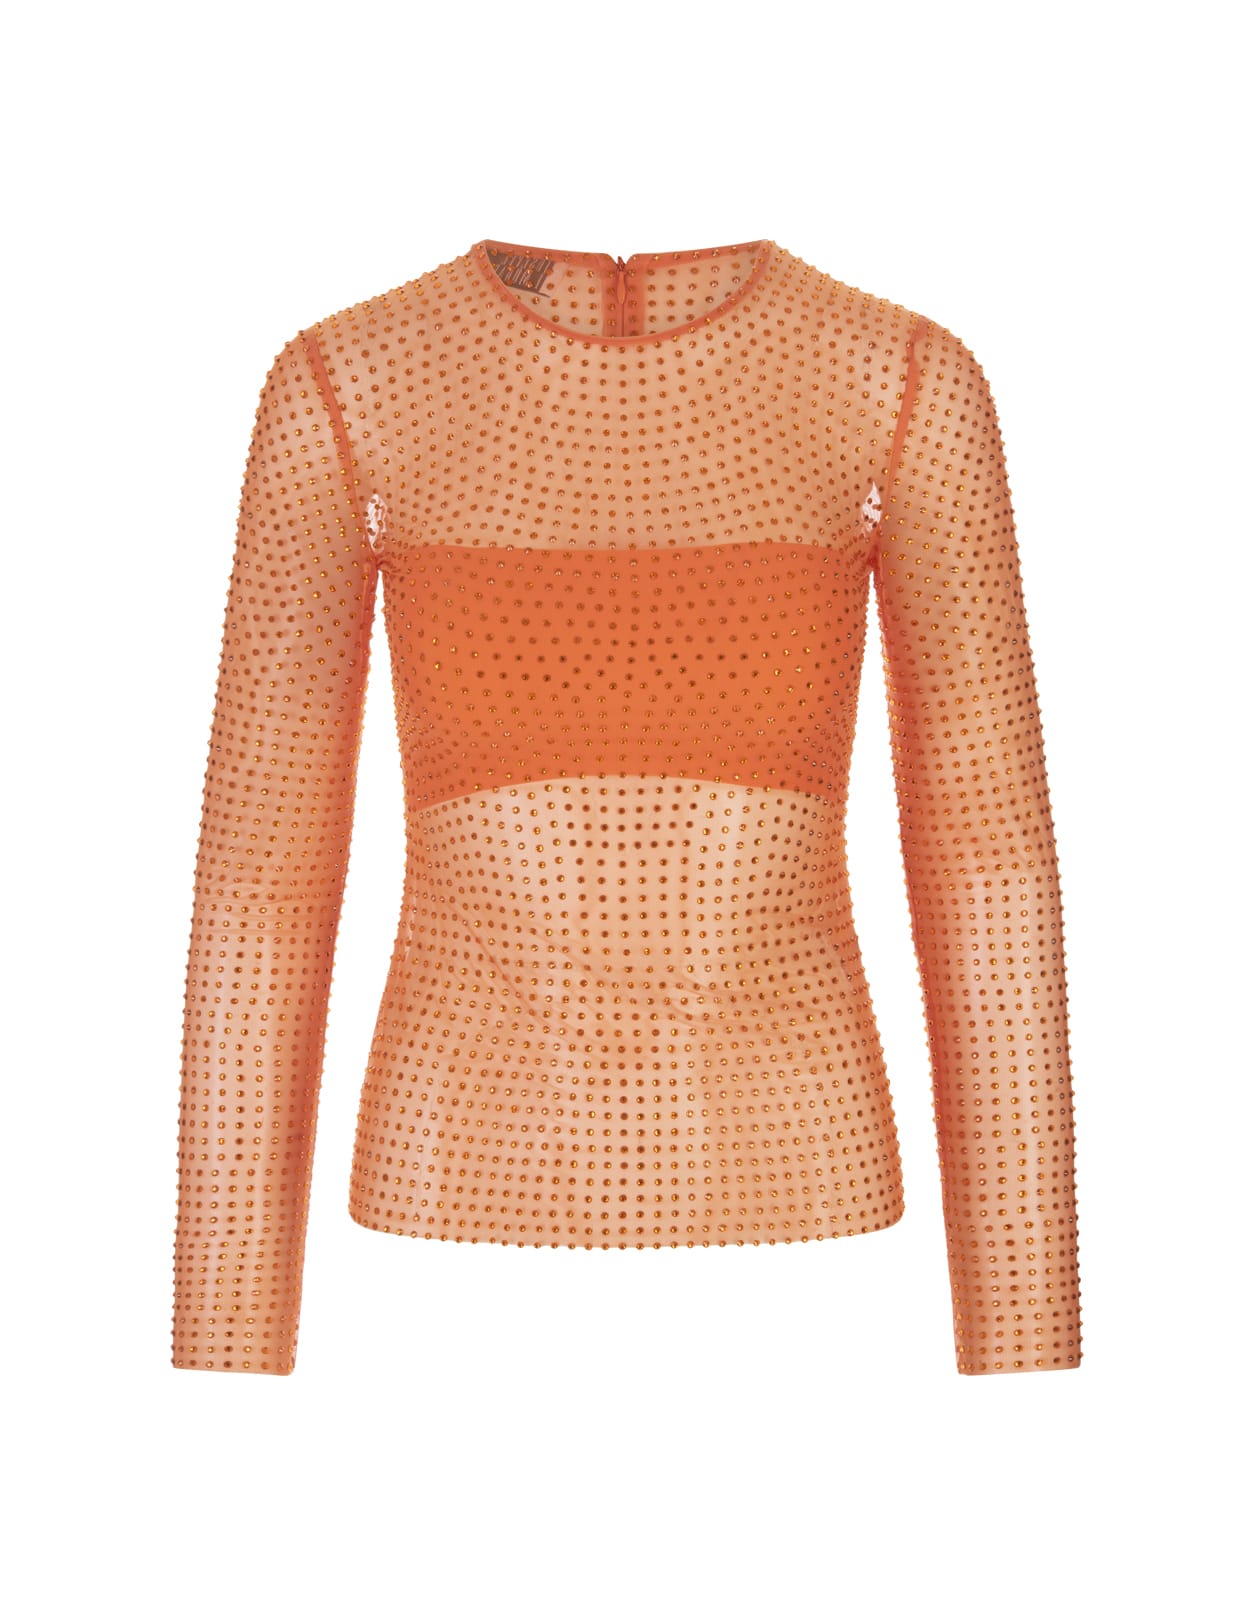 Giuseppe di Morabito Orange Long-sleeved Top With All-over Sequins